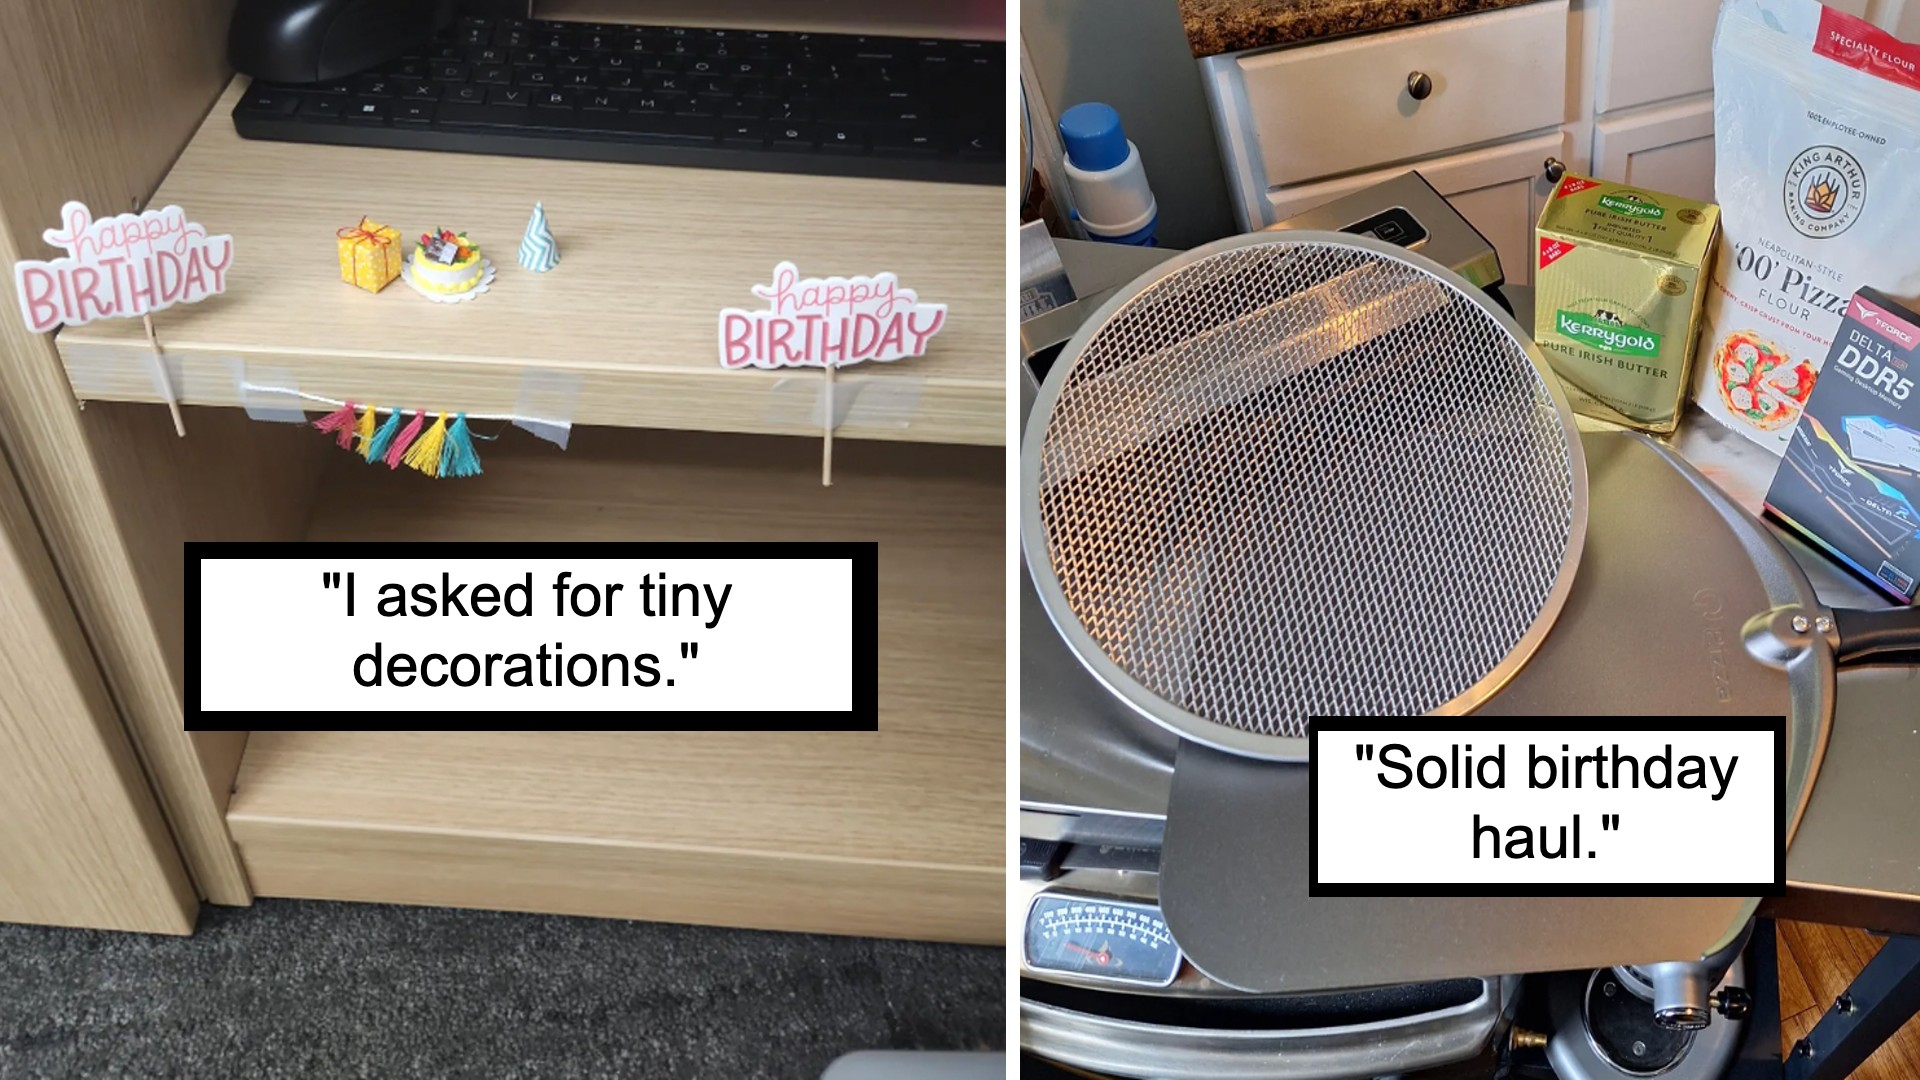 Left image: Tiny birthday decorations including a "happy birthday" sign, a miniature cake, and small flags are displayed. Right image: Various birthday gifts including a pan, coffee, soap, and a snack are shown on a kitchen countertop. Text: "I asked for tiny decorations." and "Solid birthday haul.